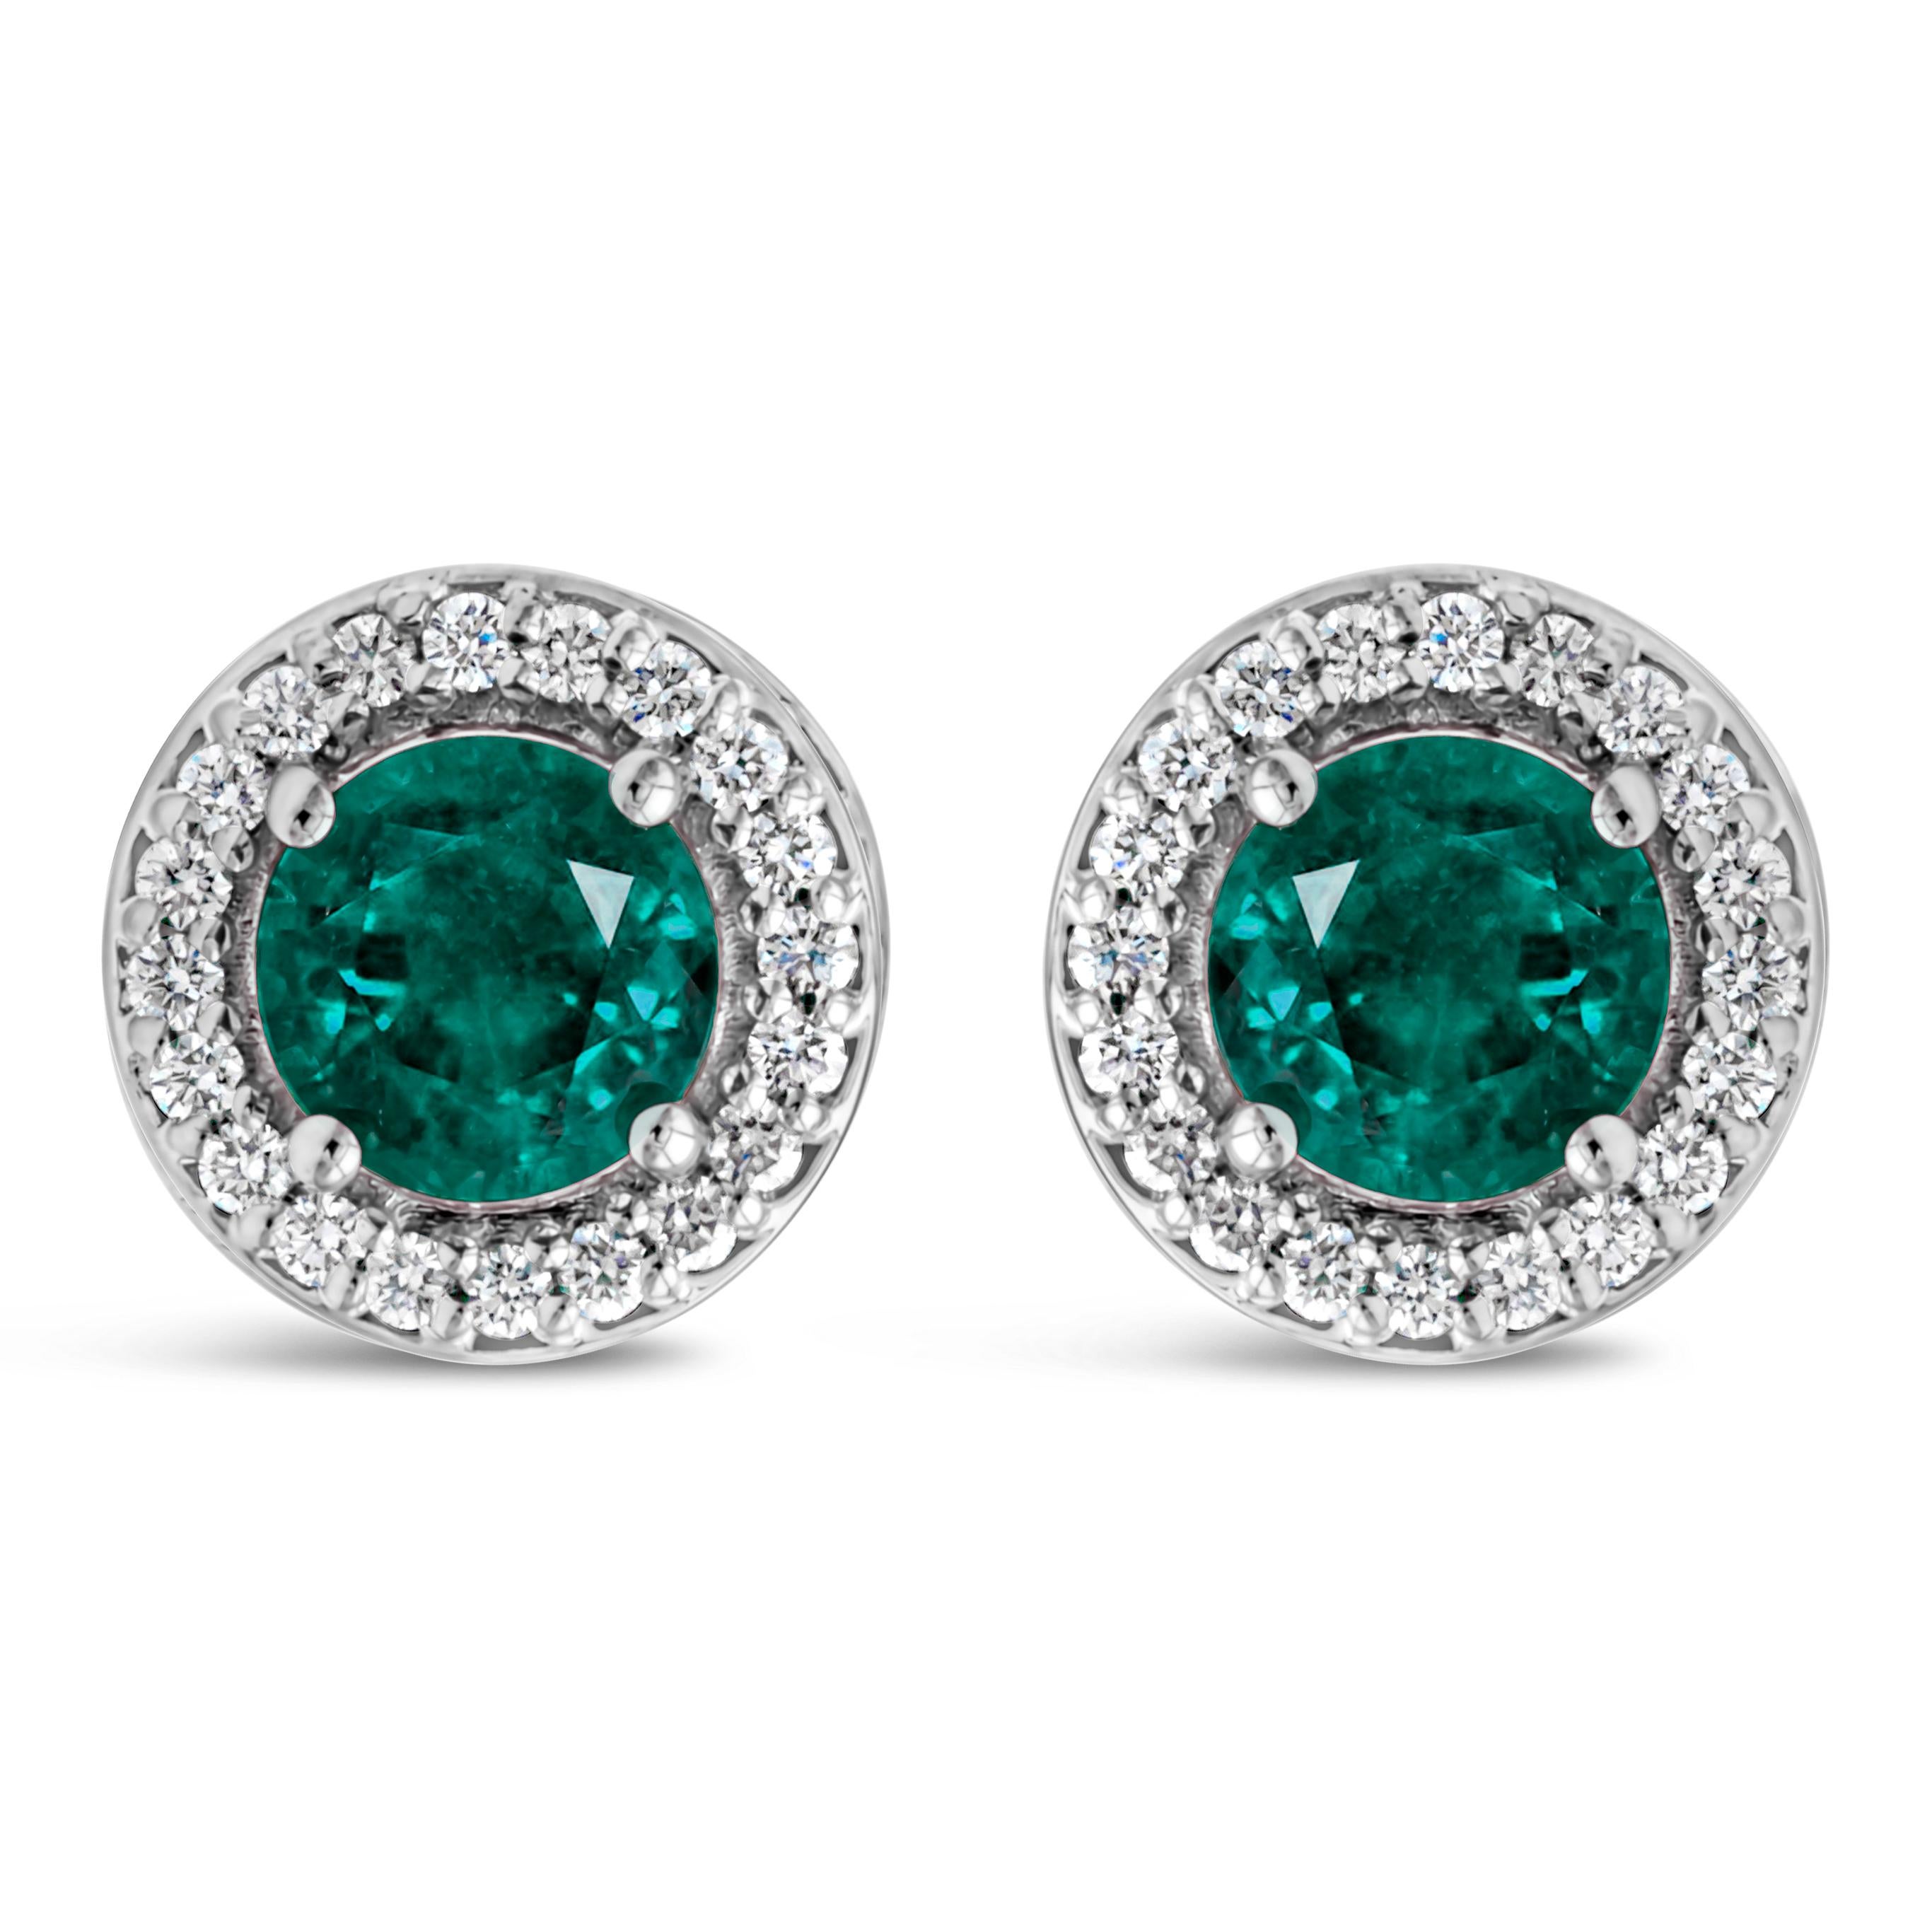 1.20 Carats Total Round Cut Green Emerald and Diamond Halo Earrings (Boucles d'oreilles Halo)